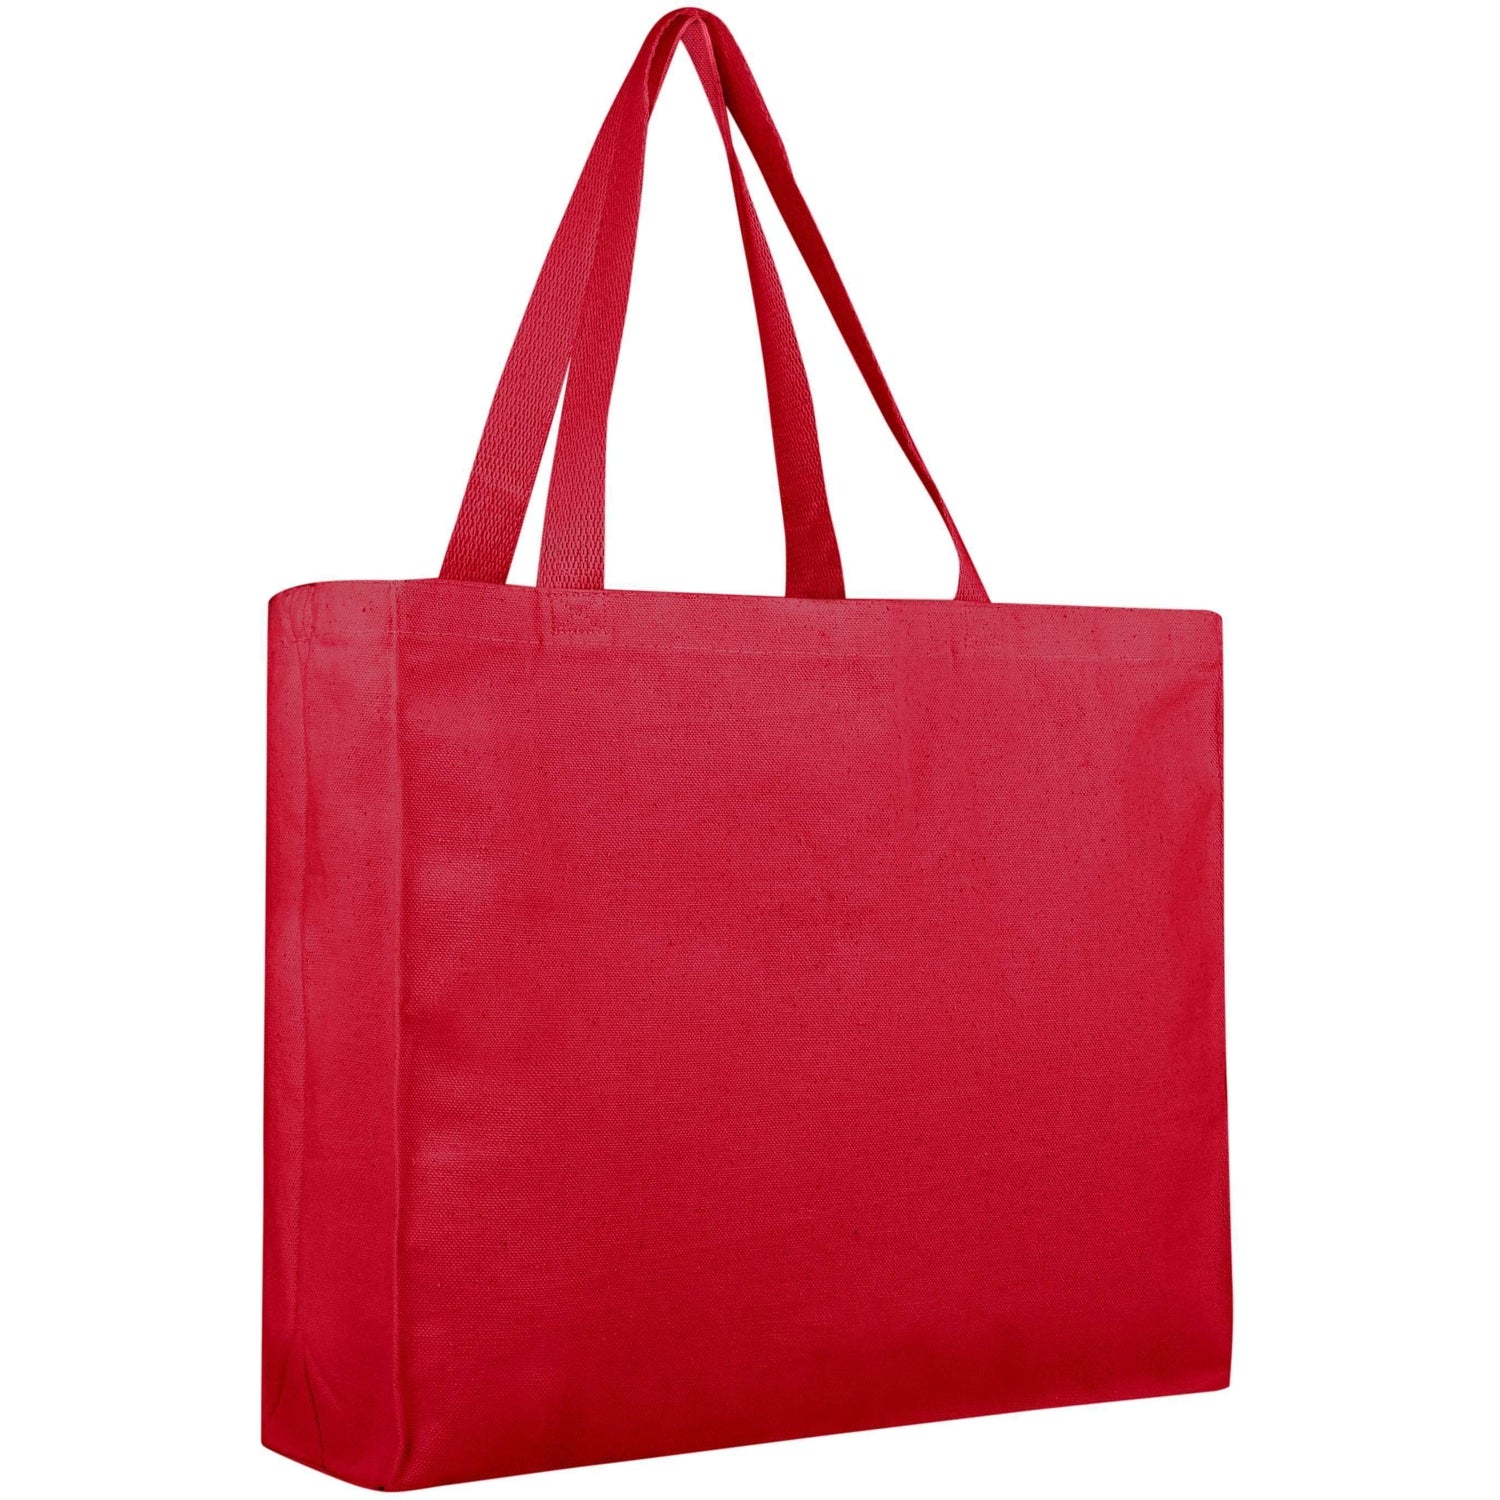 Wholesale Canvas Bags & Blank Canvas Tote Bags with Gusset